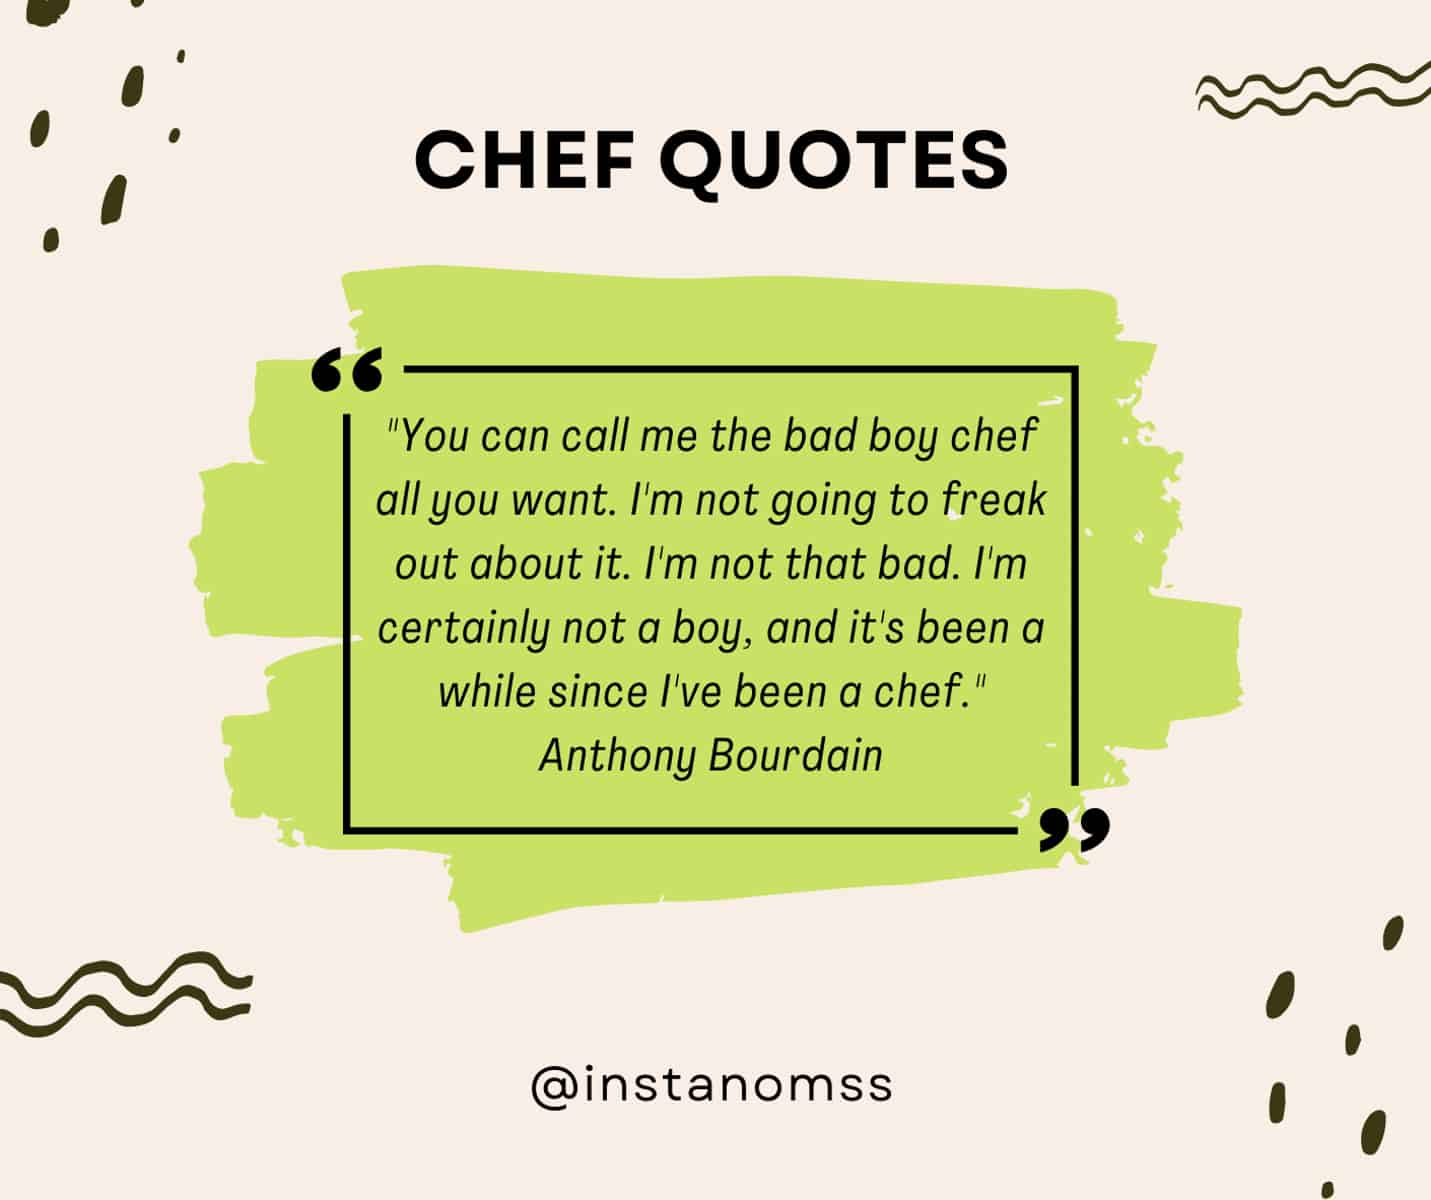 "You can call me the bad boy chef all you want. I'm not going to freak out about it. I'm not that bad. I'm certainly not a boy, and it's been a while since I've been a chef." Anthony Bourdain